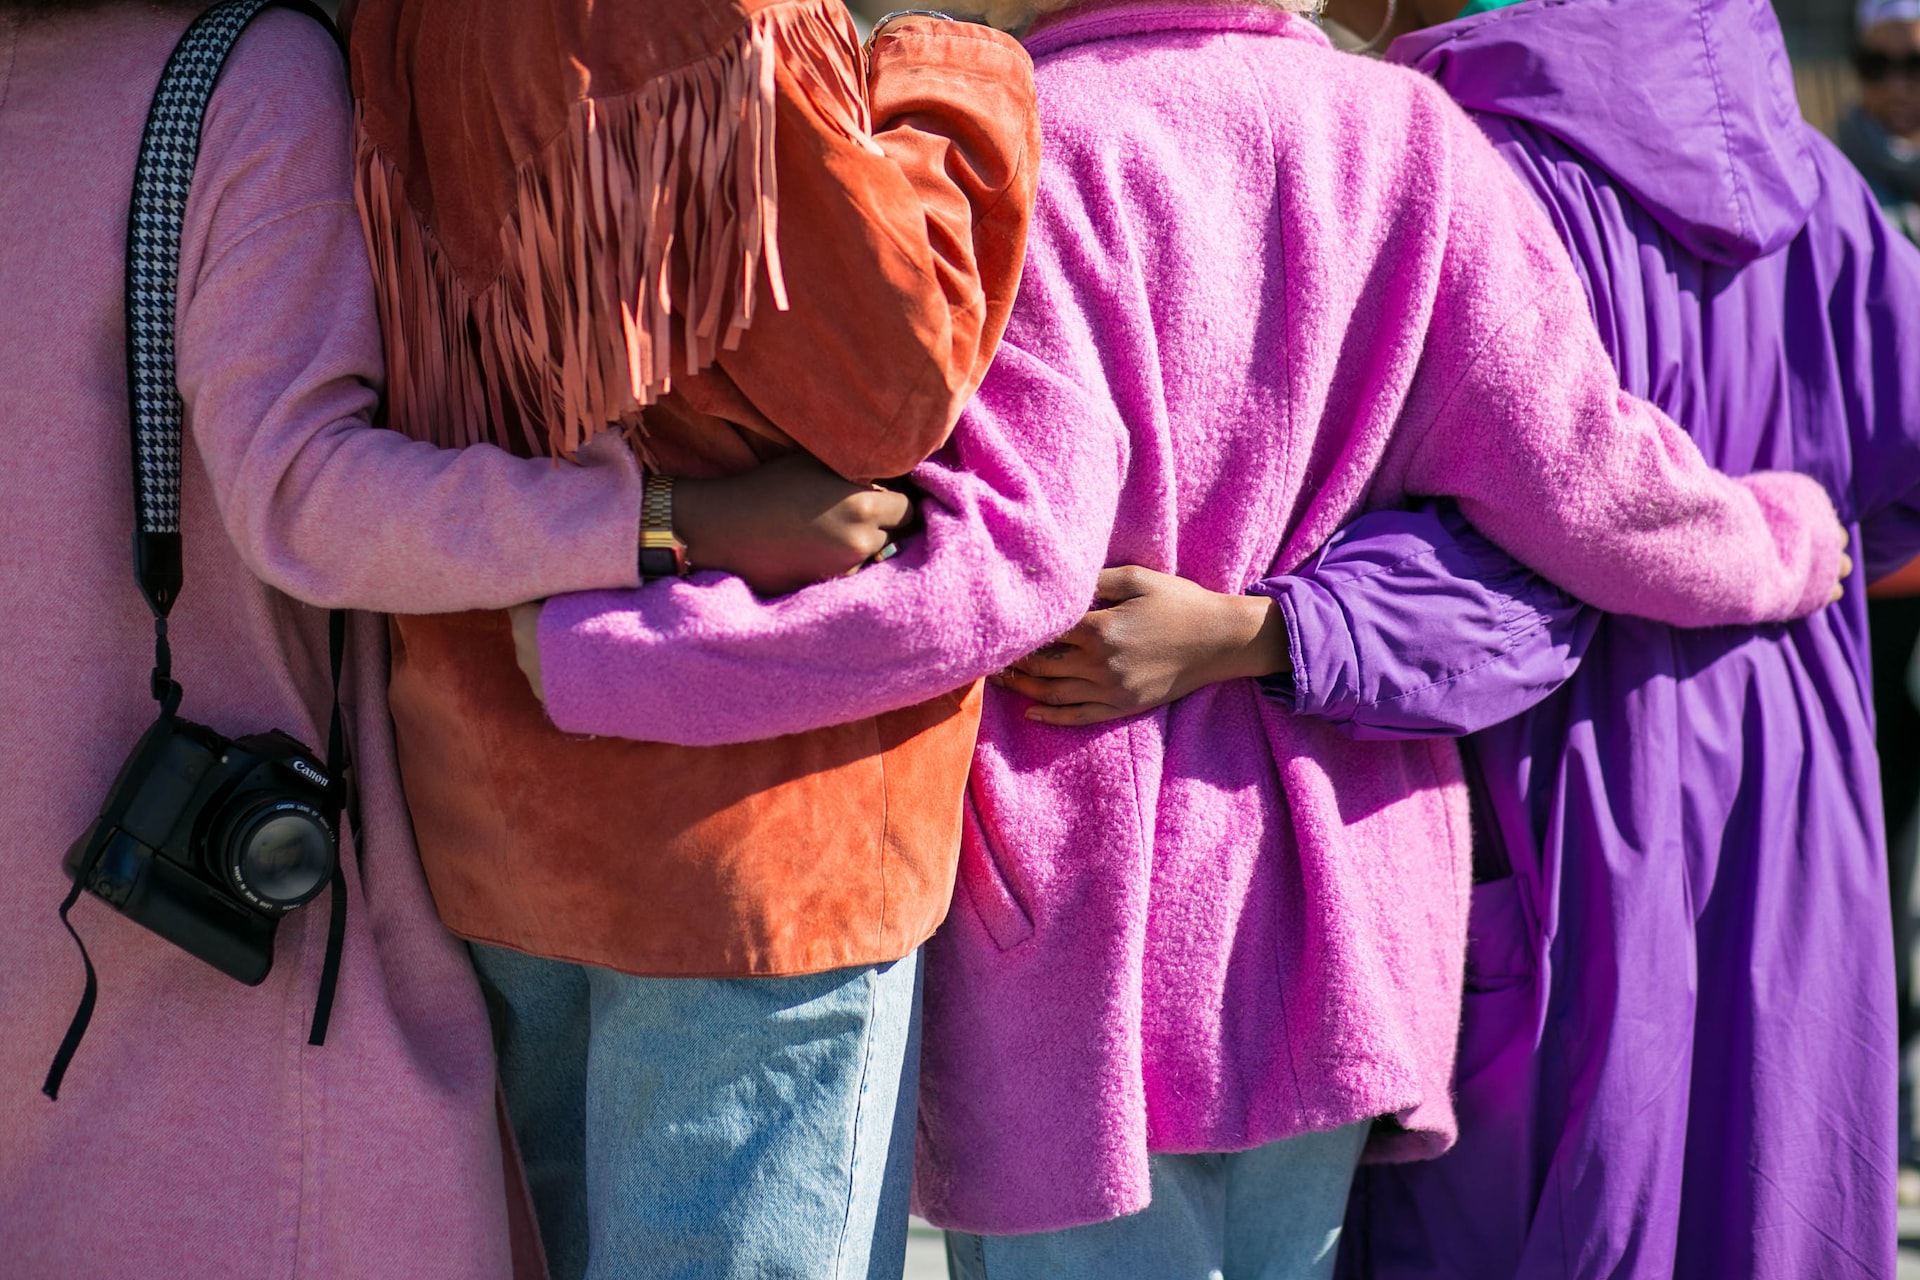 A group of women hugging each other